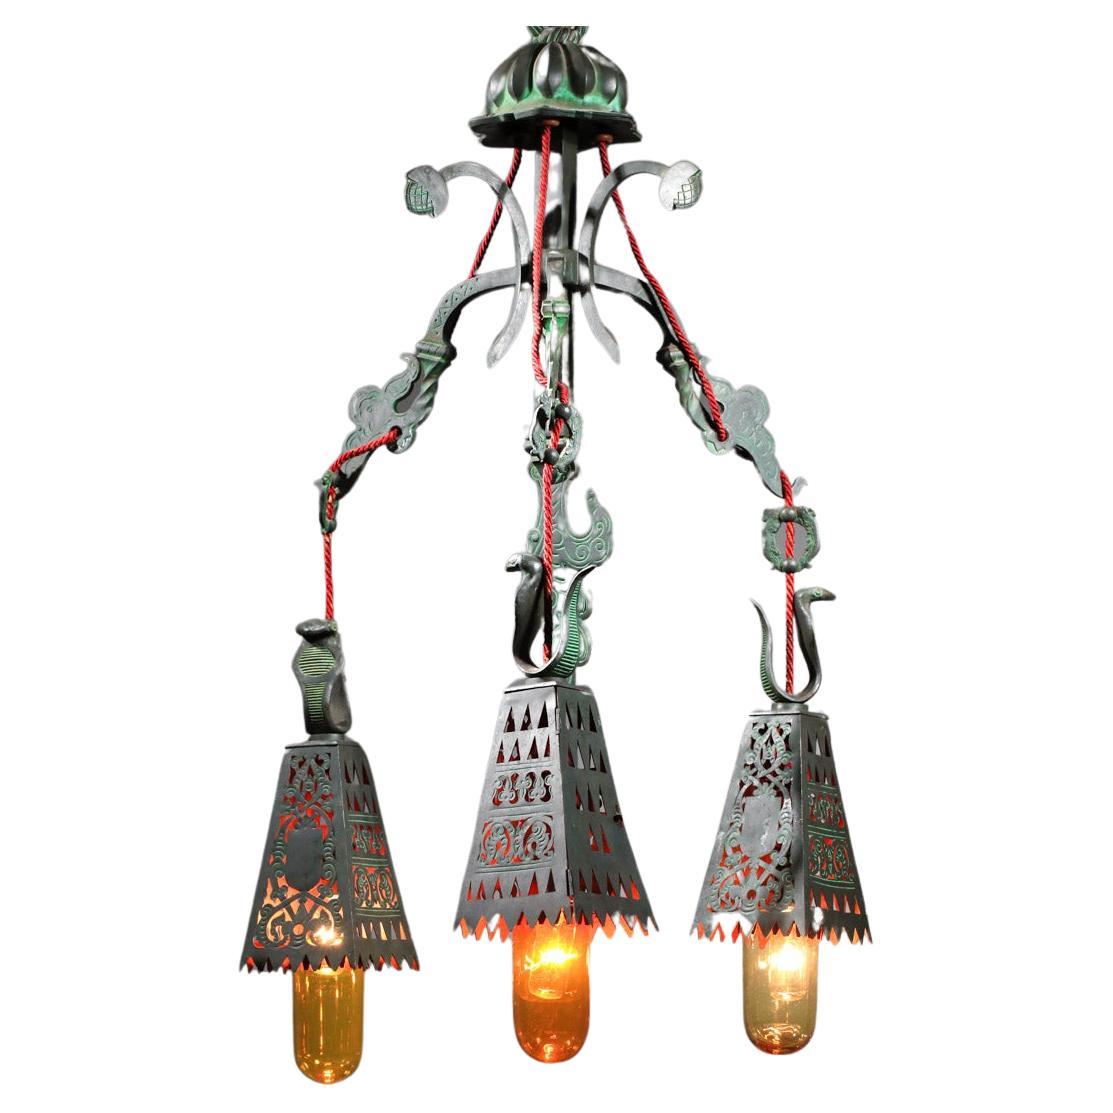 Large suspension lamp from the 40's, unique model. Three-branched chandelier in patinated and fully chased bonze with orientalist decorations, exceptional workmanship (see photos). Lampshade in colored glass in a cameo of oranges. Very fine vintage